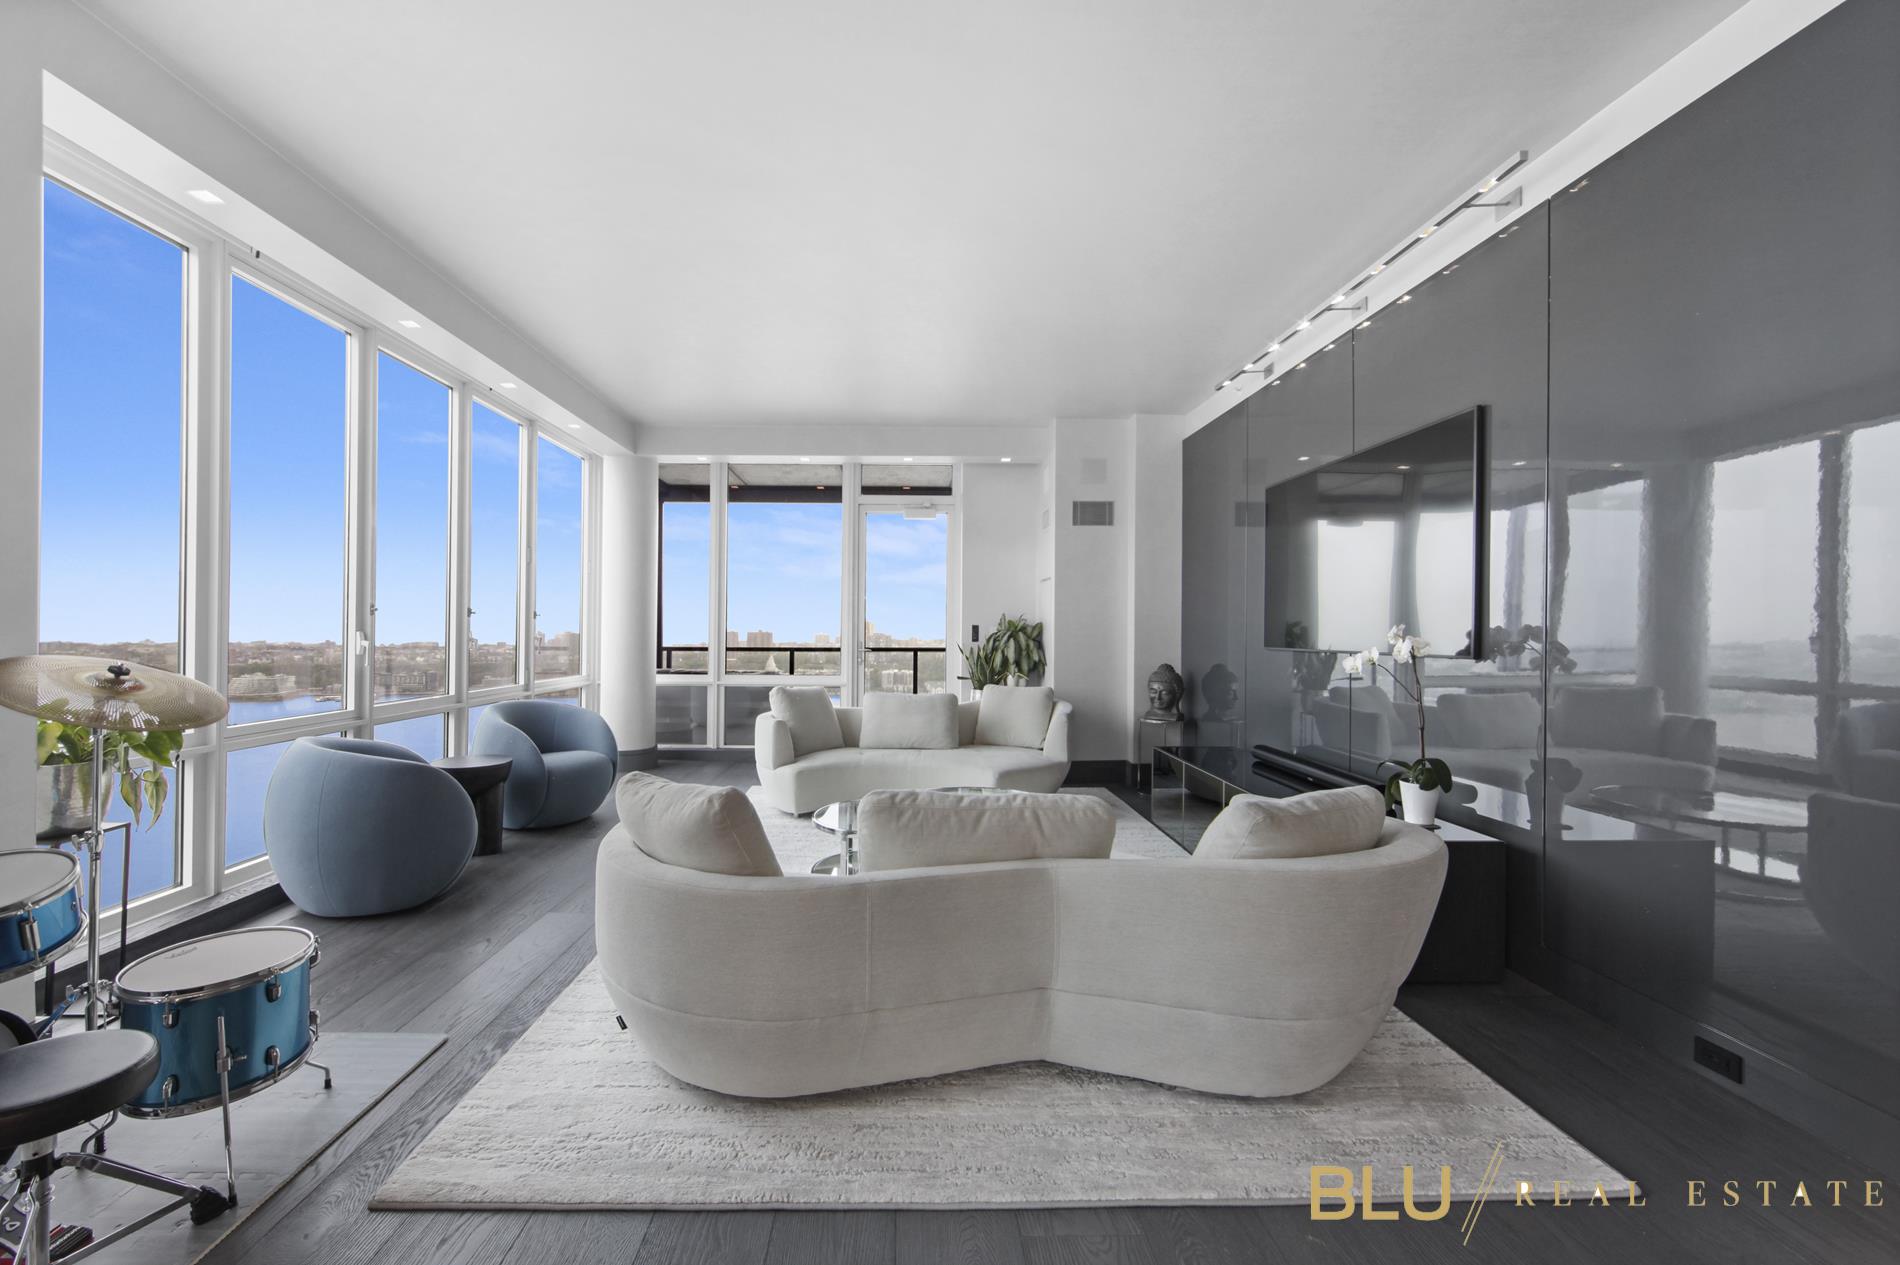 60 Riverside Boulevard Ph-3802, Lincoln Square, Upper West Side, NYC - 4 Bedrooms  
4.5 Bathrooms  
9 Rooms - 